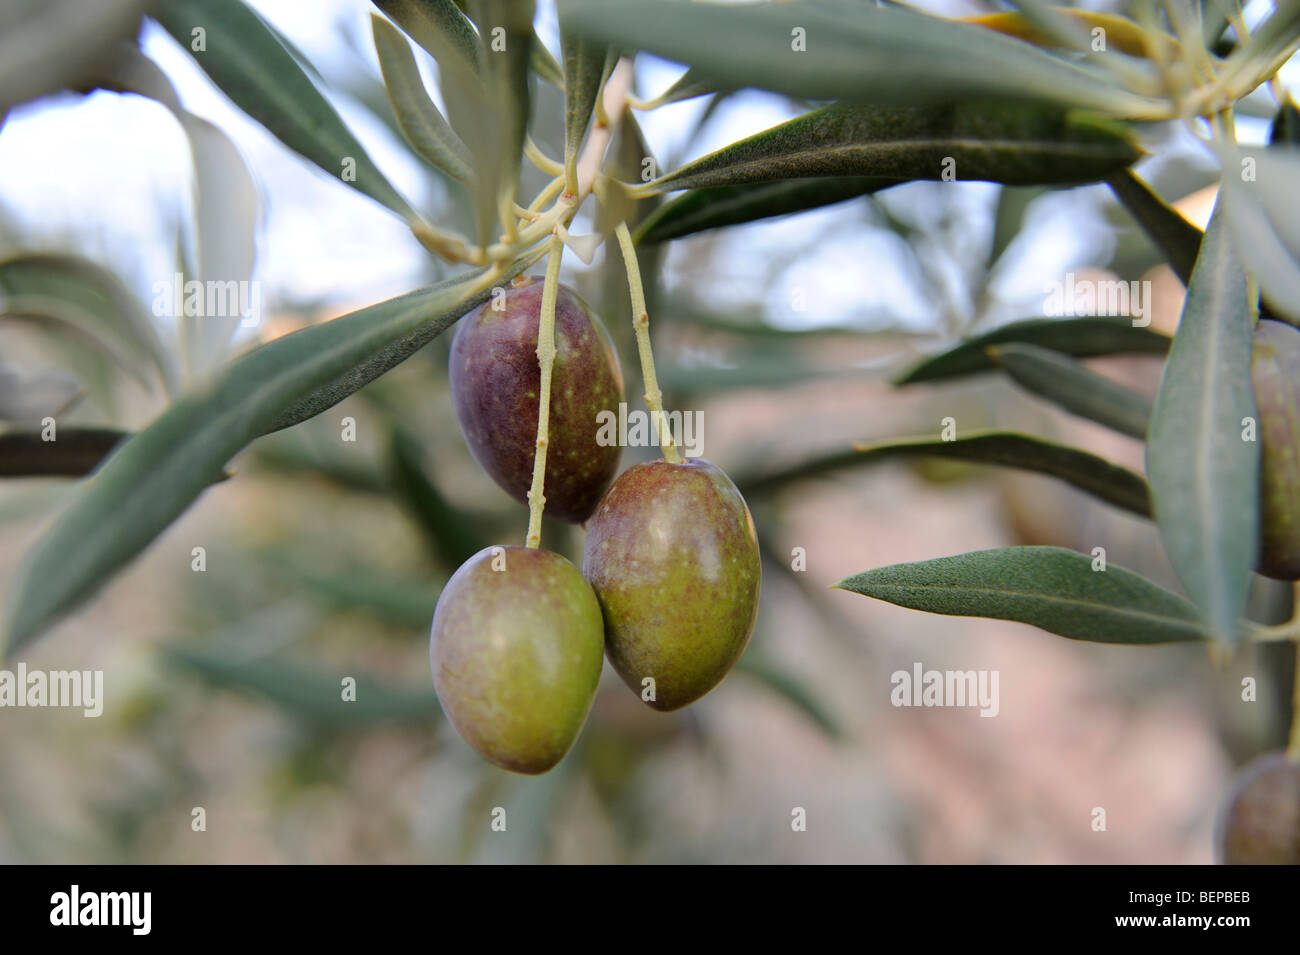 Olives on a tree Stock Photo